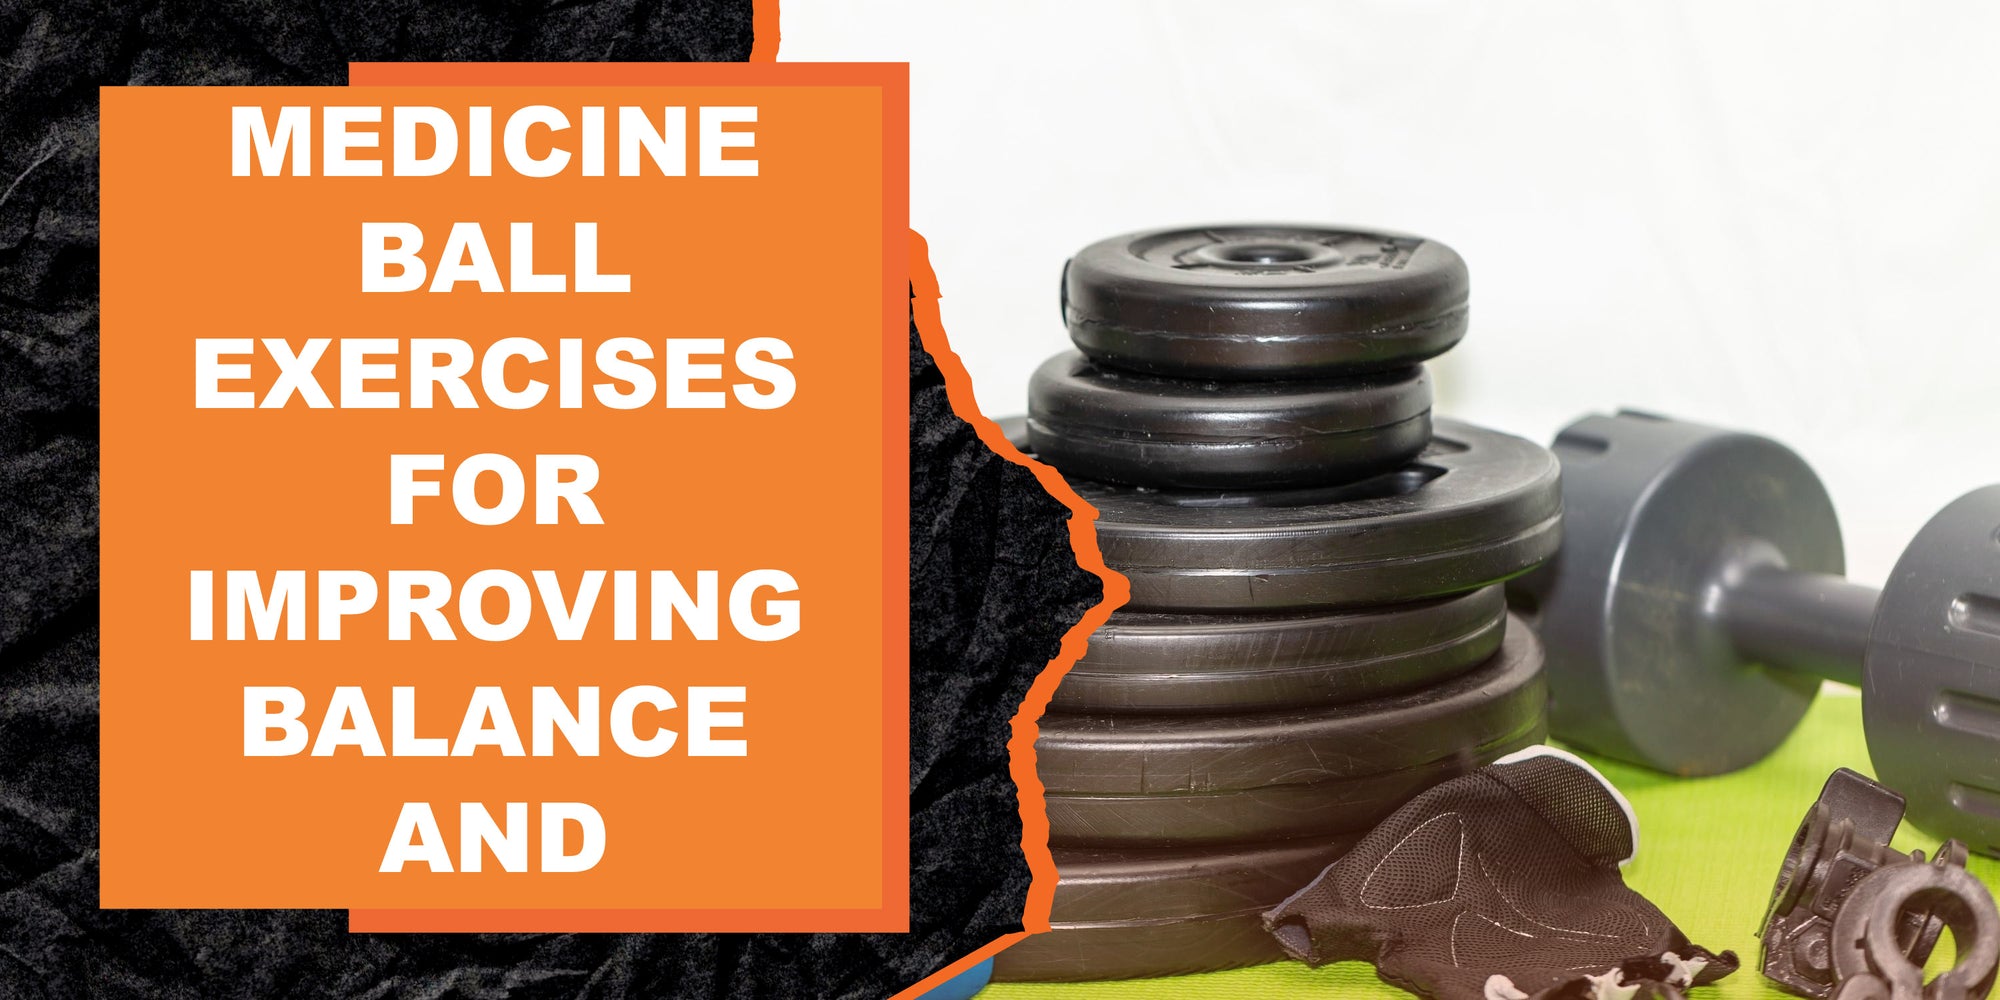 Medicine Ball Exercises for Improving Balance and Coordination